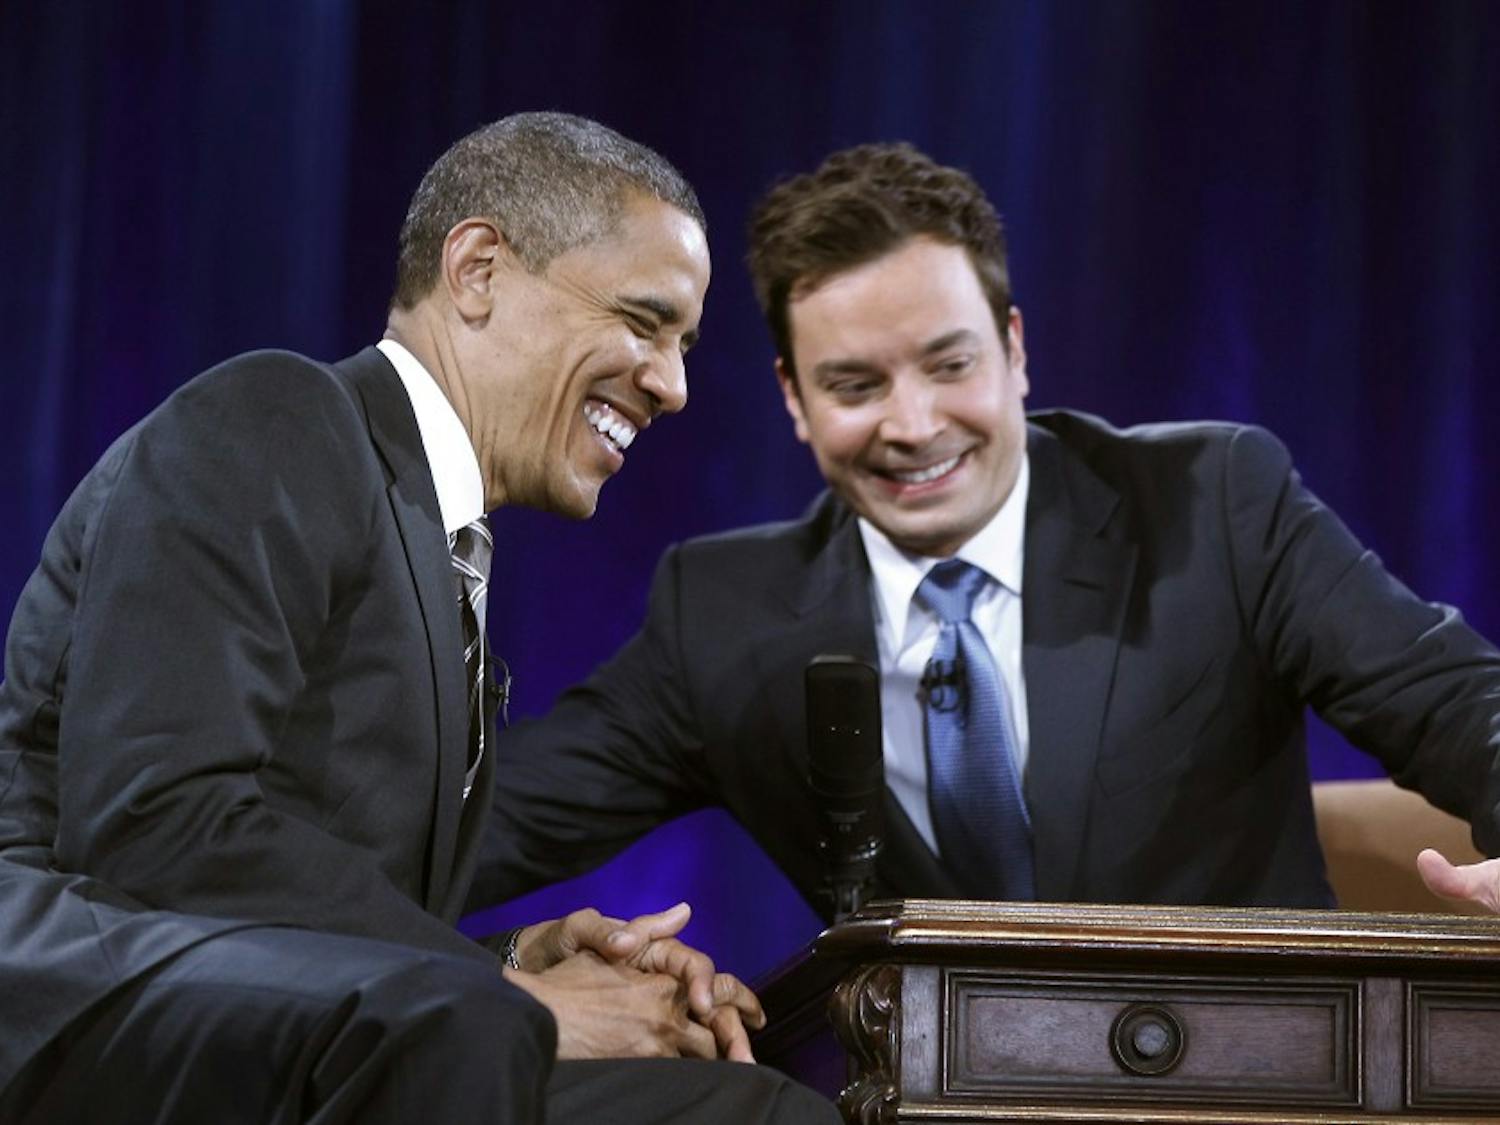 President Barack Obama  laughs as he tapes an appearance on the Jimmy Fallon show at Memorial Hall on the  UNC campus in Chapel Hill, N.C. Tuesday April 24, 2012. POOL PHOTO/CHUCK LIDDY/ THE NEWS & OBSERVER